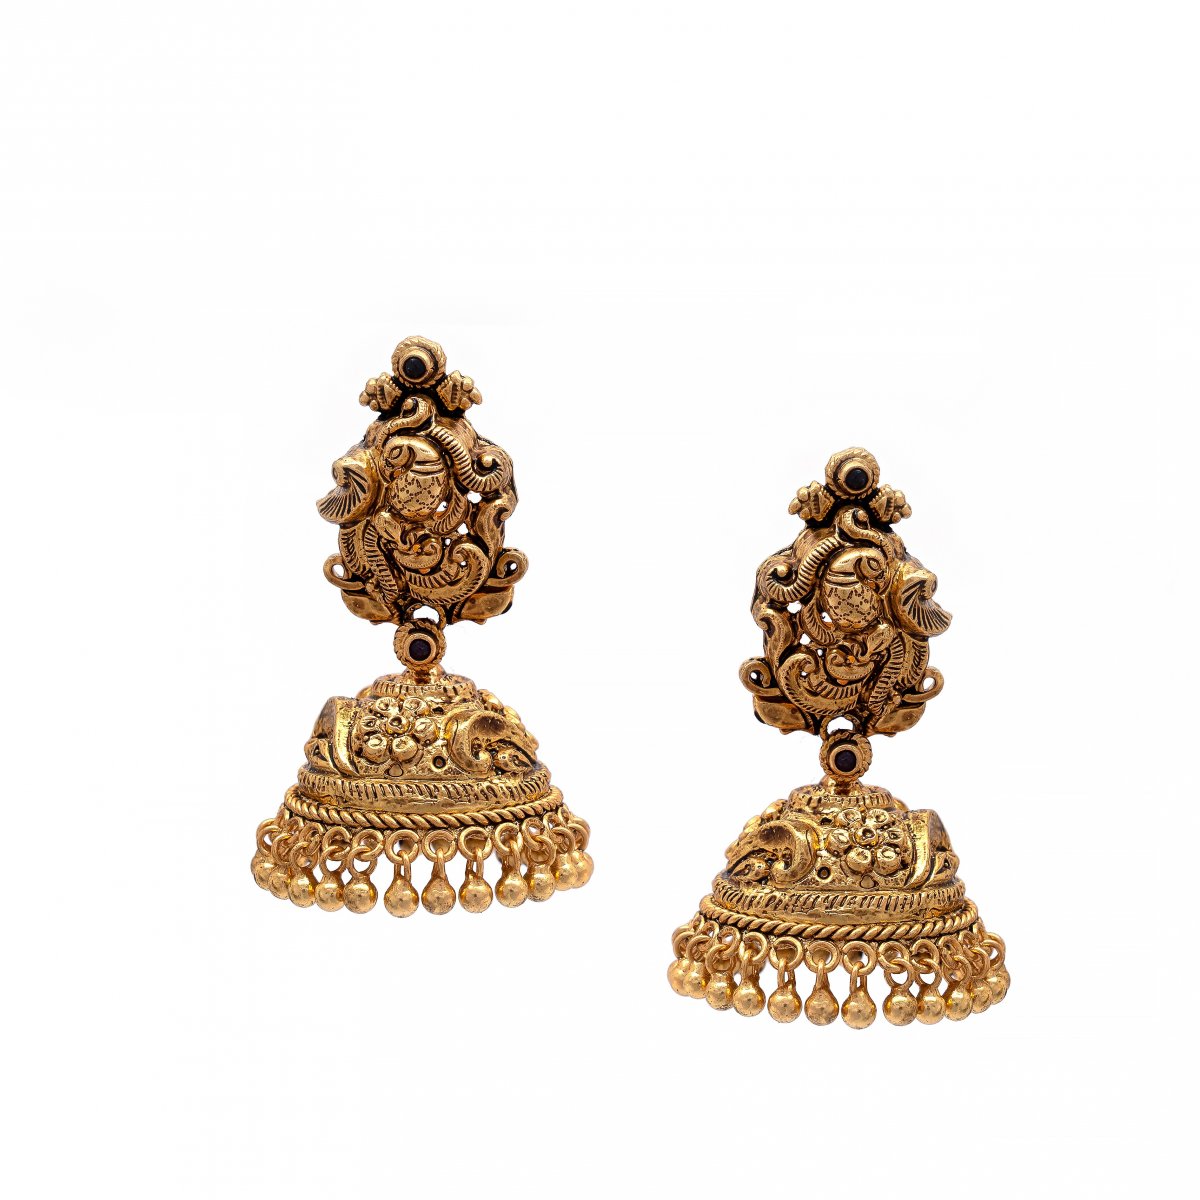 92.5 SILVER GOLD POLISHED SOUTH INDIAN NAGAS JHUMKI FOR GIRLS 